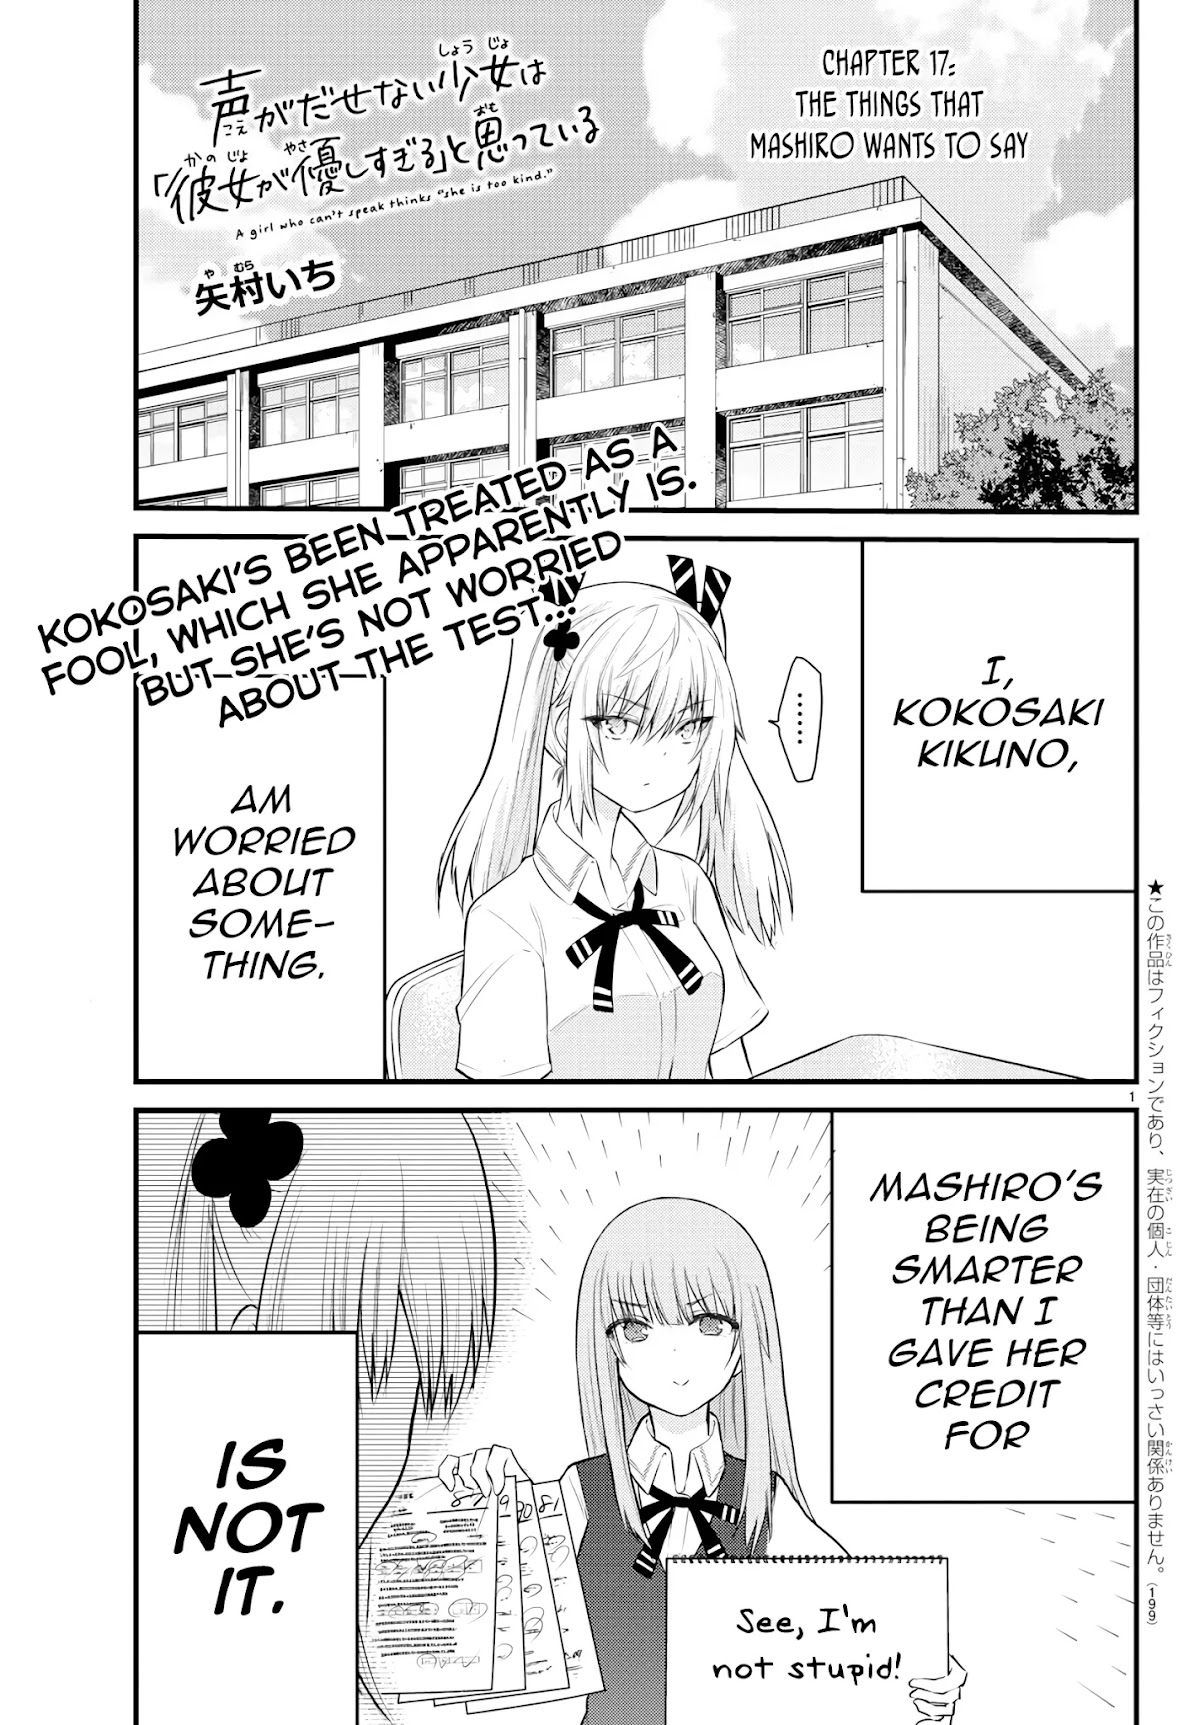 The Mute Girl And Her New Friend (Serialization) Chapter 17: The Things That Mashiro Wants To Say - Picture 1